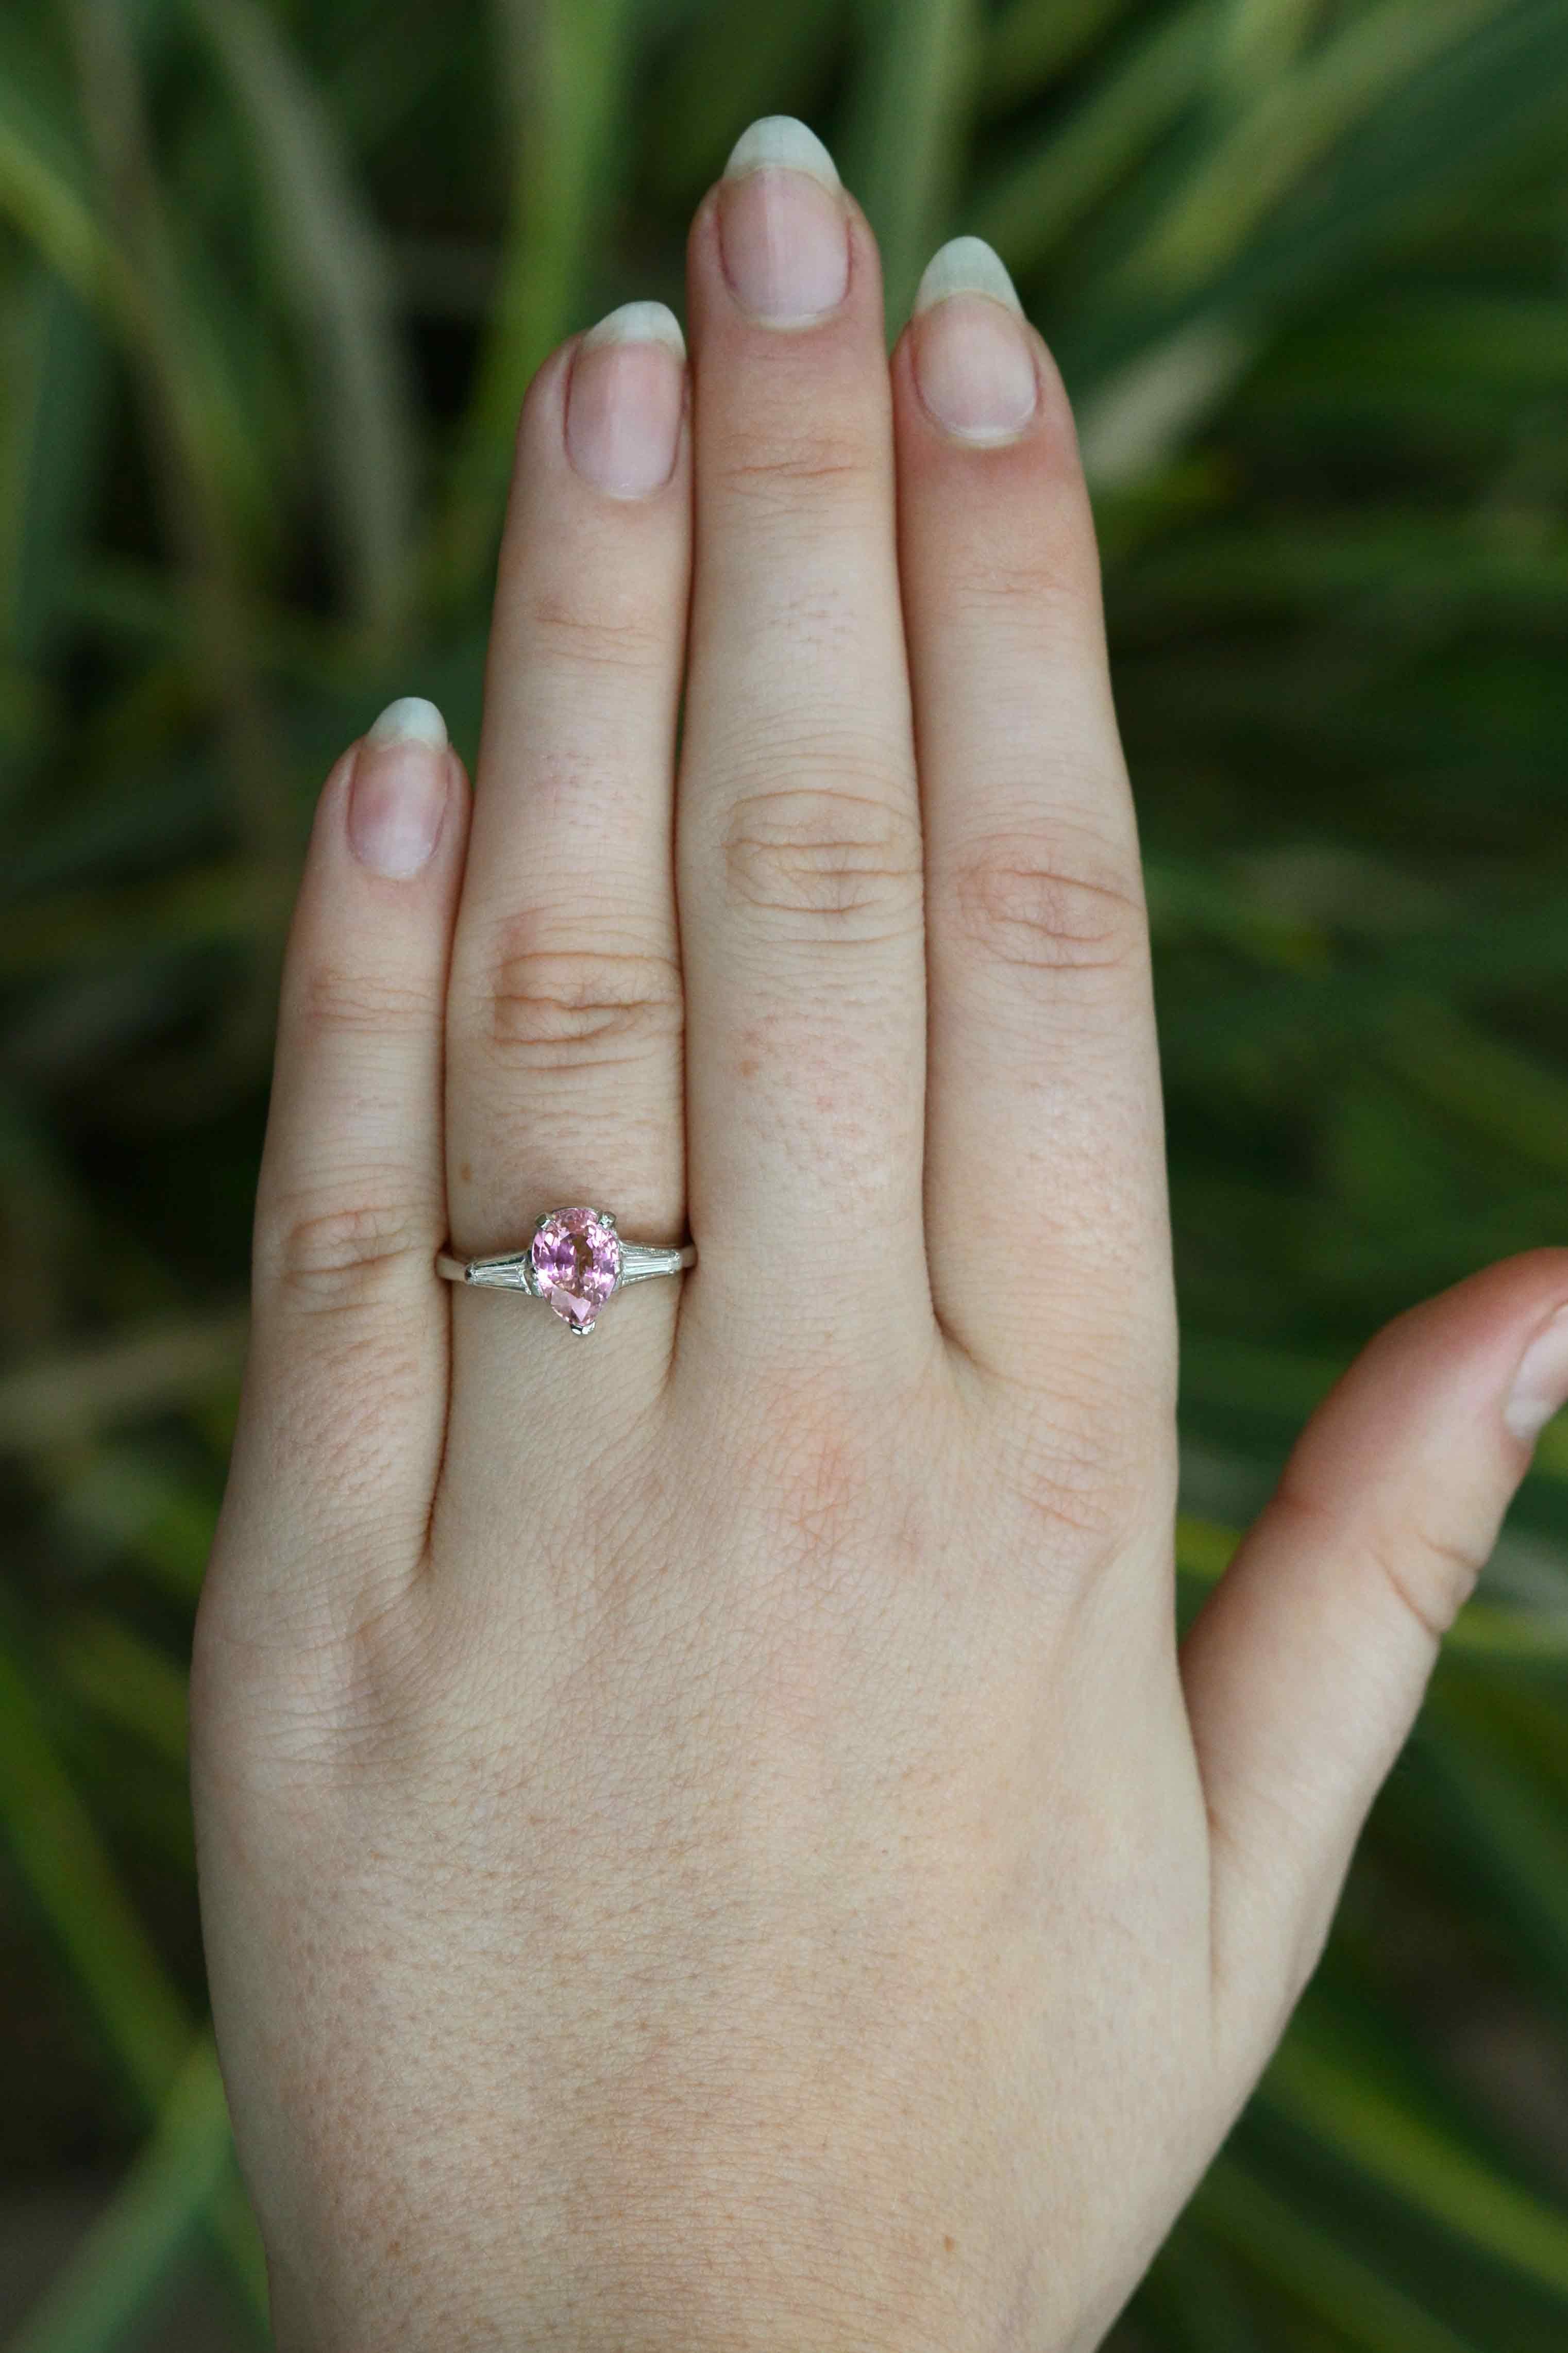 This divine pink sapphire and diamond ring makes for a perfect engagement ring. A 3 stone design representing love and compassion, the pink sapphire is lively and bright with a distinctive pear cut. The gemstone is nestled in platinum and paired